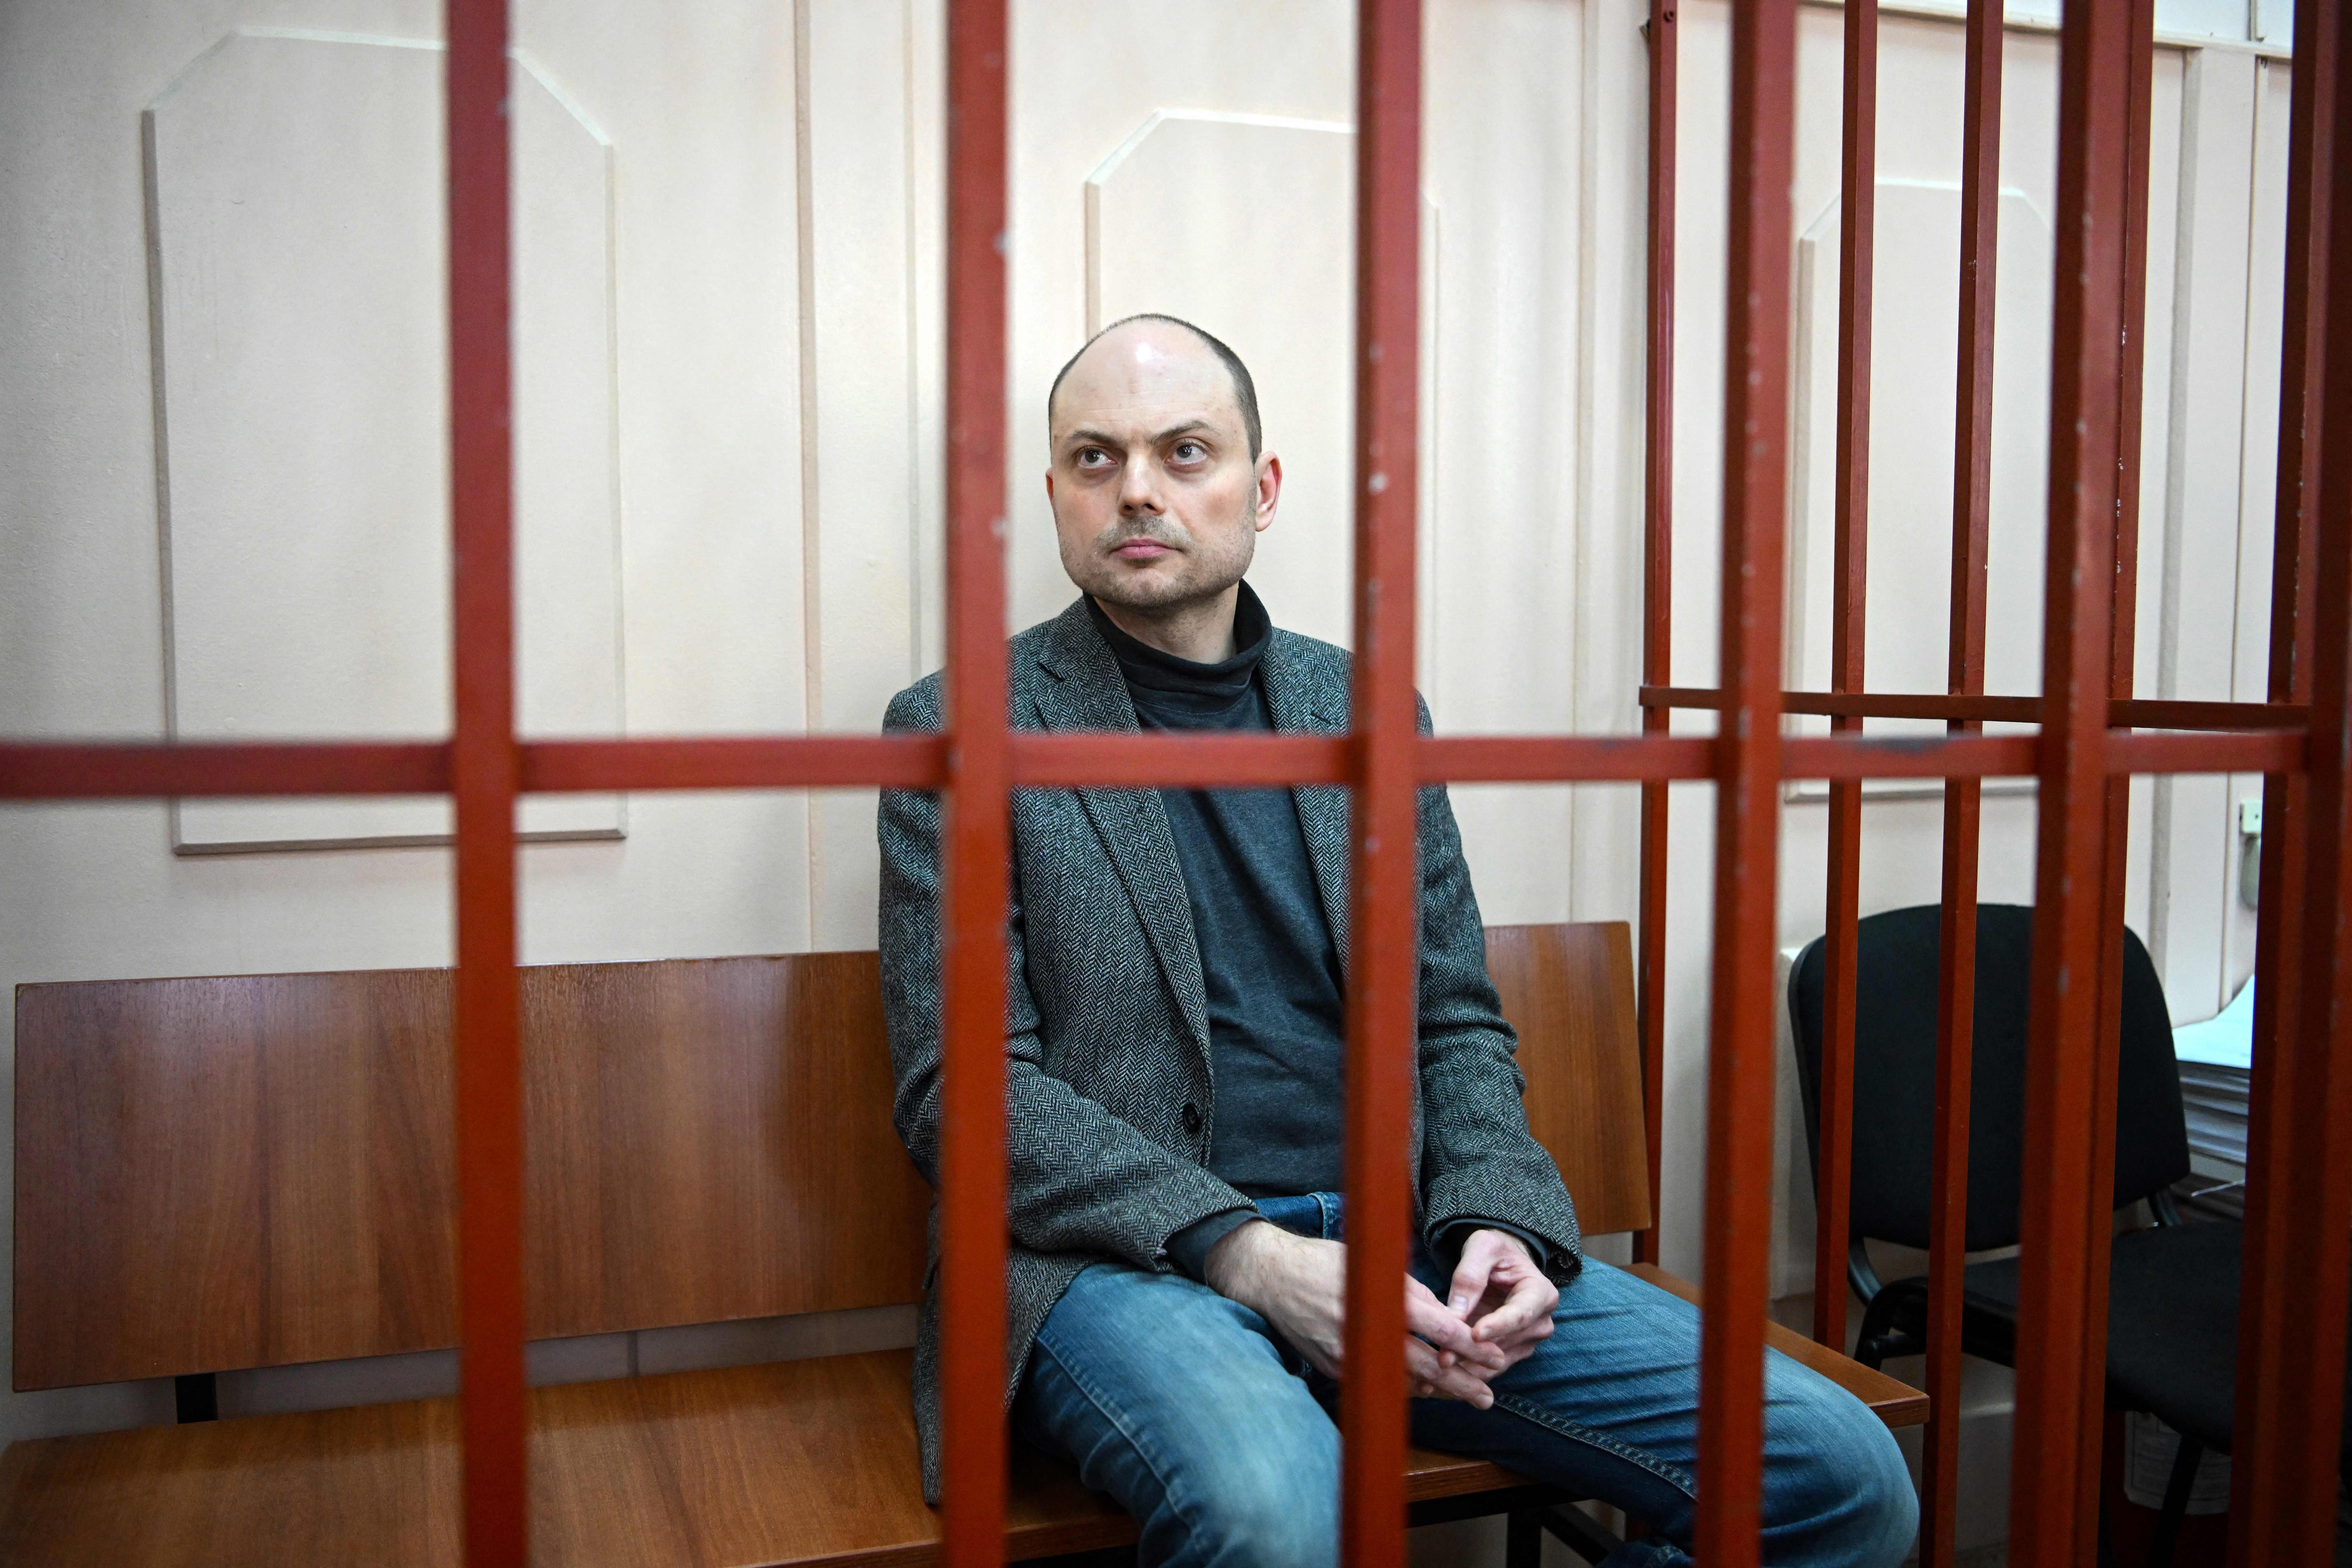 Russian opposition activist Vladimir Kara-Murza sits on a bench inside a defendants’ cage during a hearing at the Basmanny court in Moscow on October 10, 2022